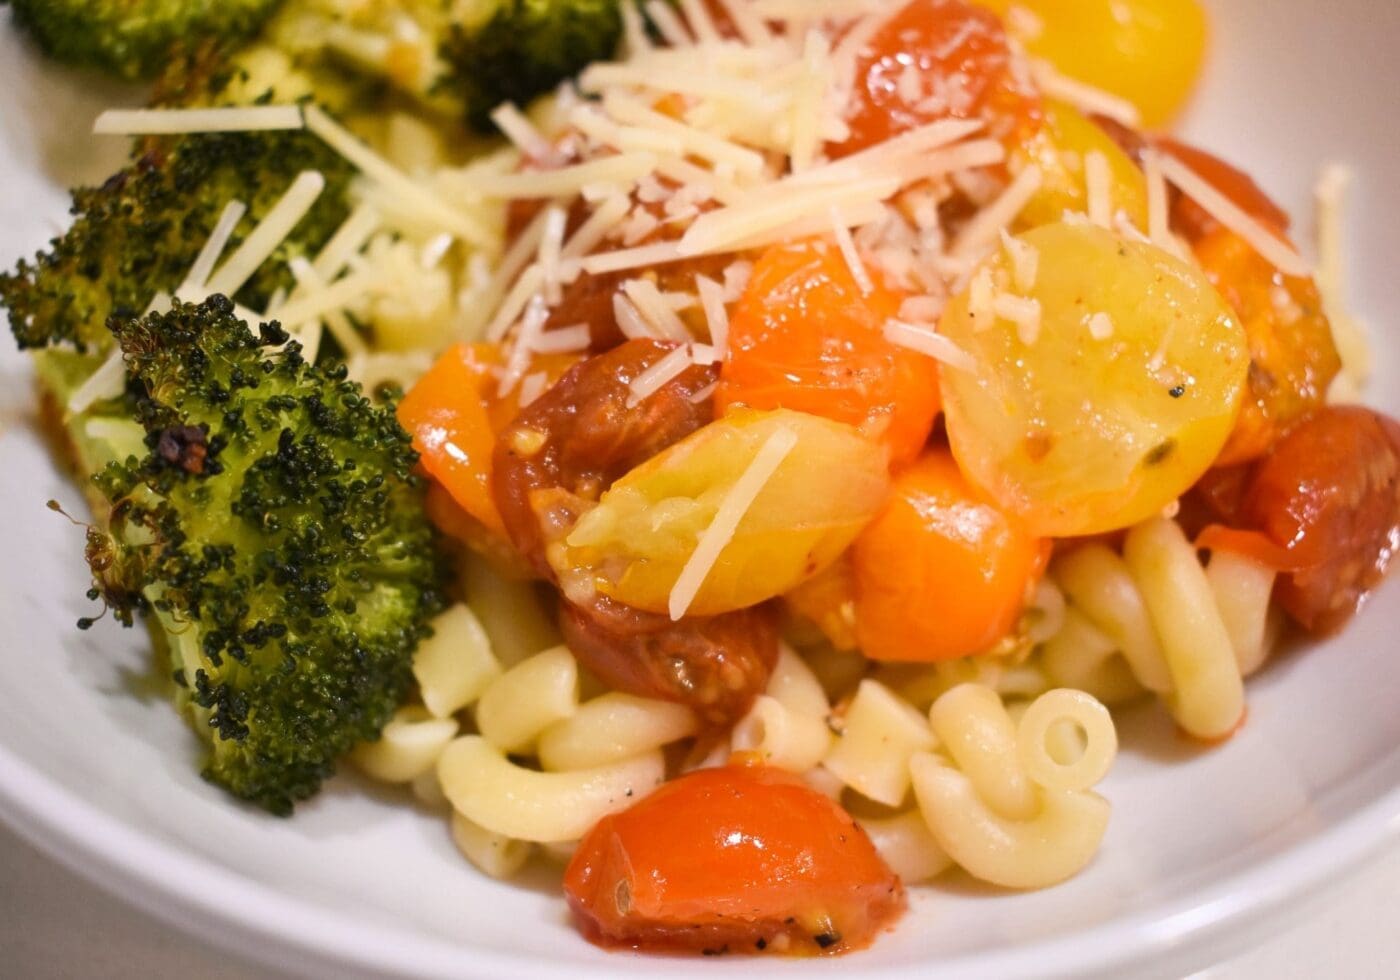 Plated Pomodoro pasta with roasted broccoli and shredded parmesan cheese.